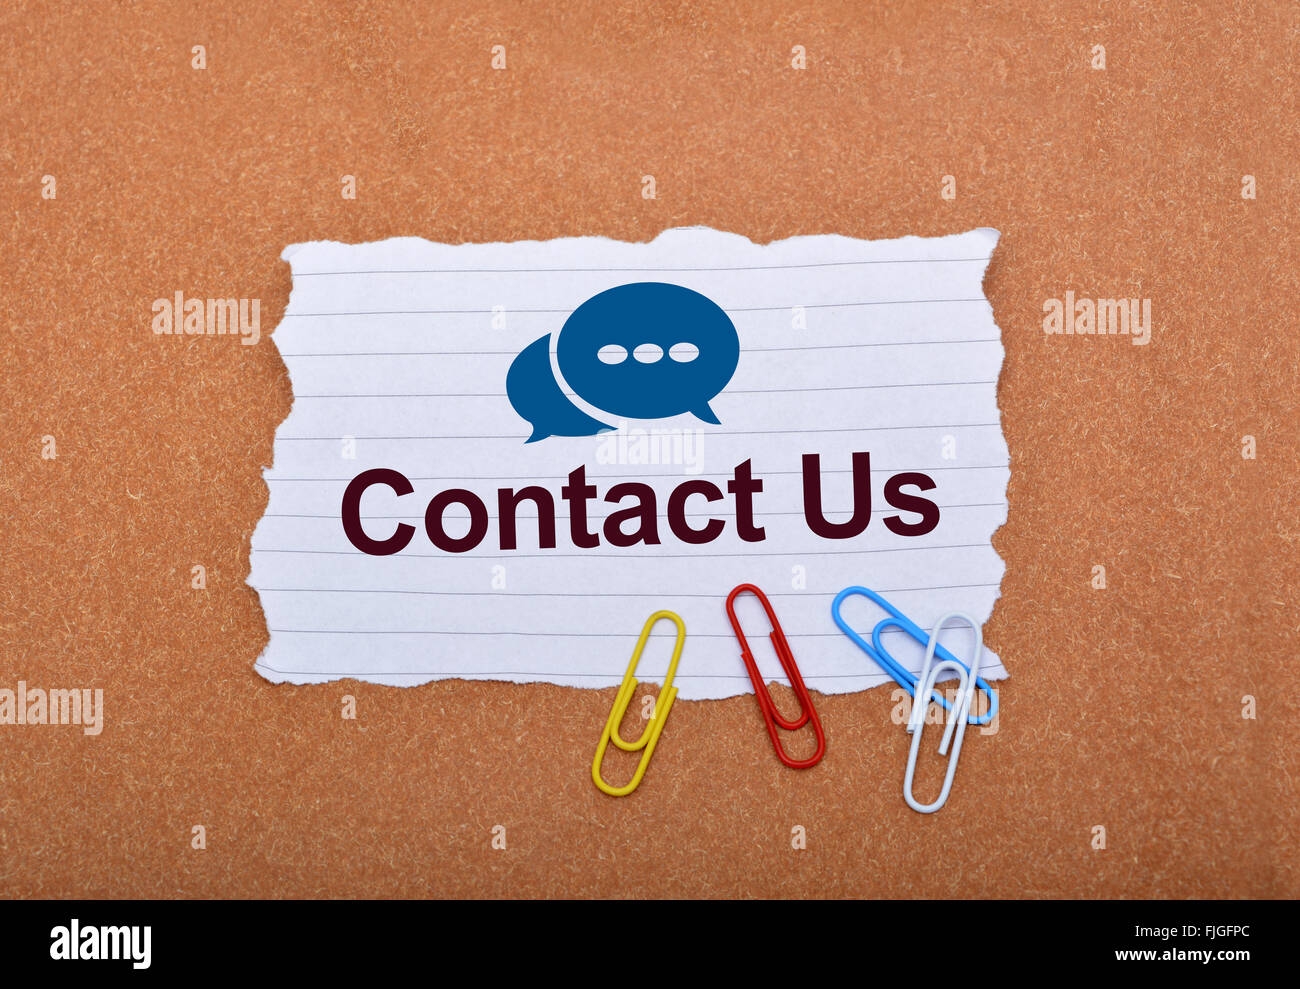 Contact Us with Speech Icons on Paper. Stock Photo